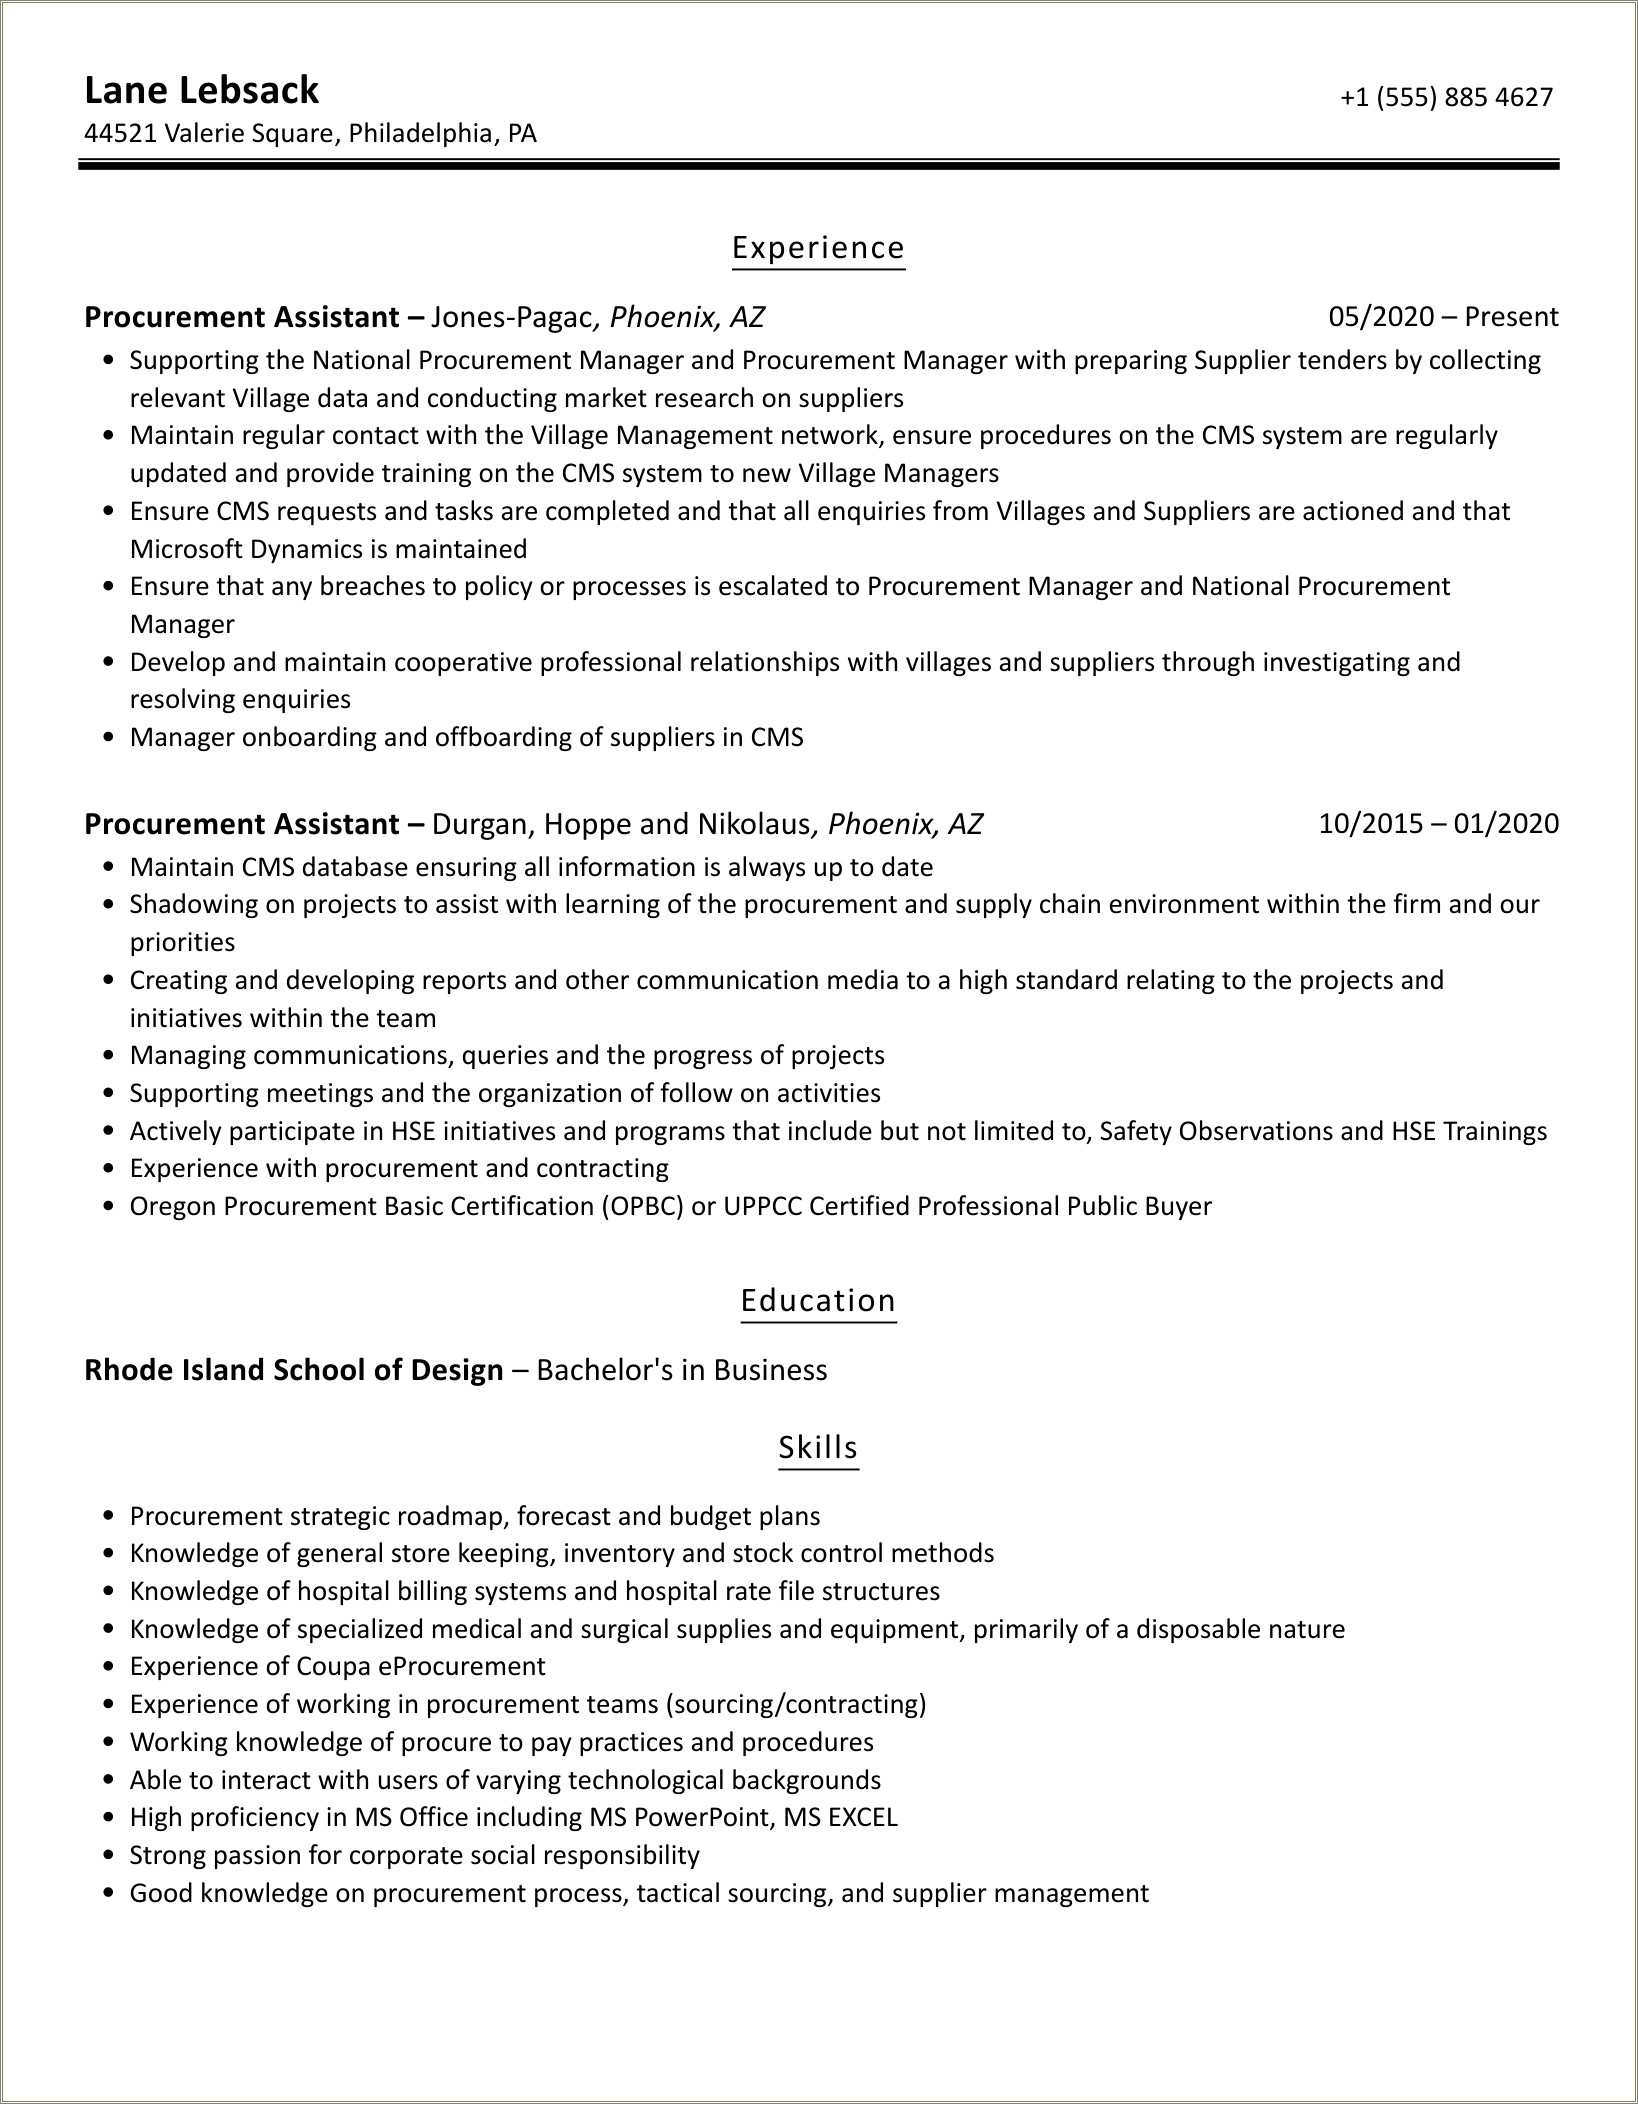 Career Objective On Resume For A Procurement Assistant